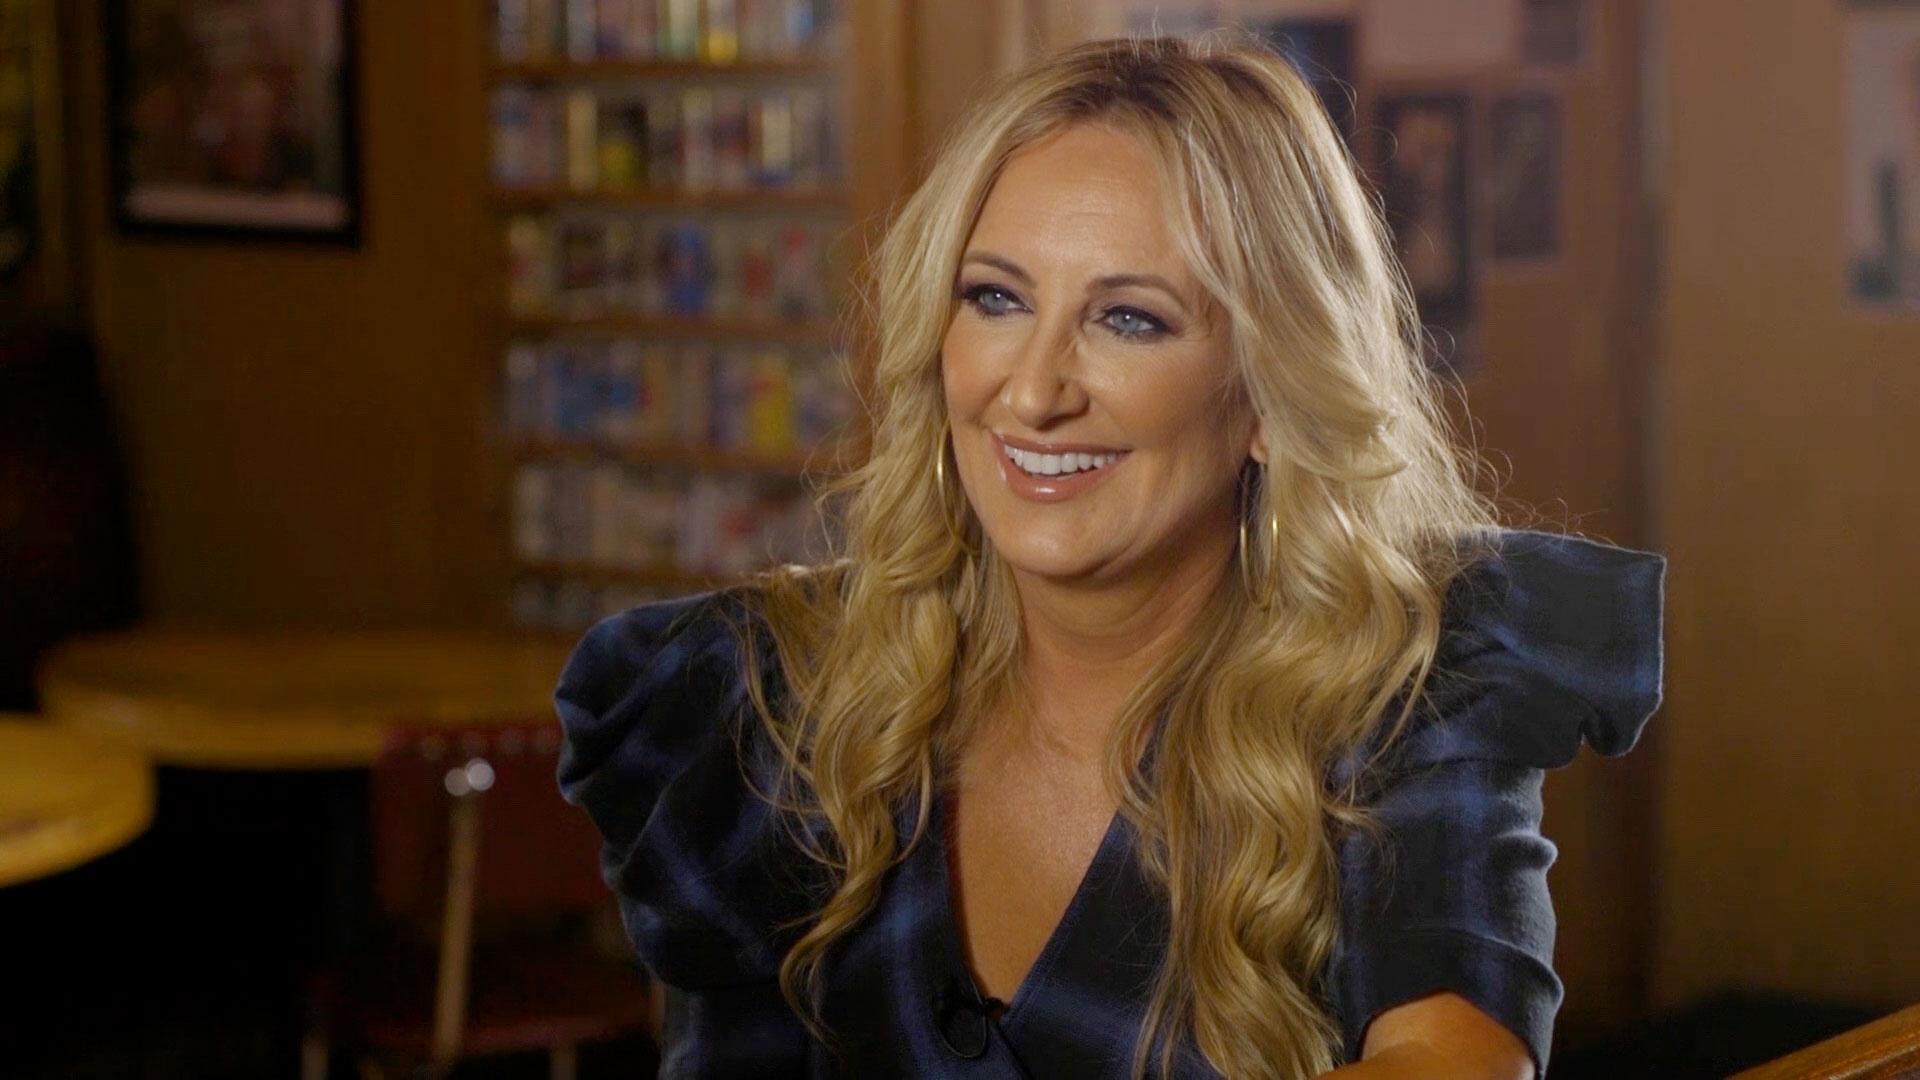 The Interview Show | Lee Ann Womack | The Interview Show | Season 5 | PBS